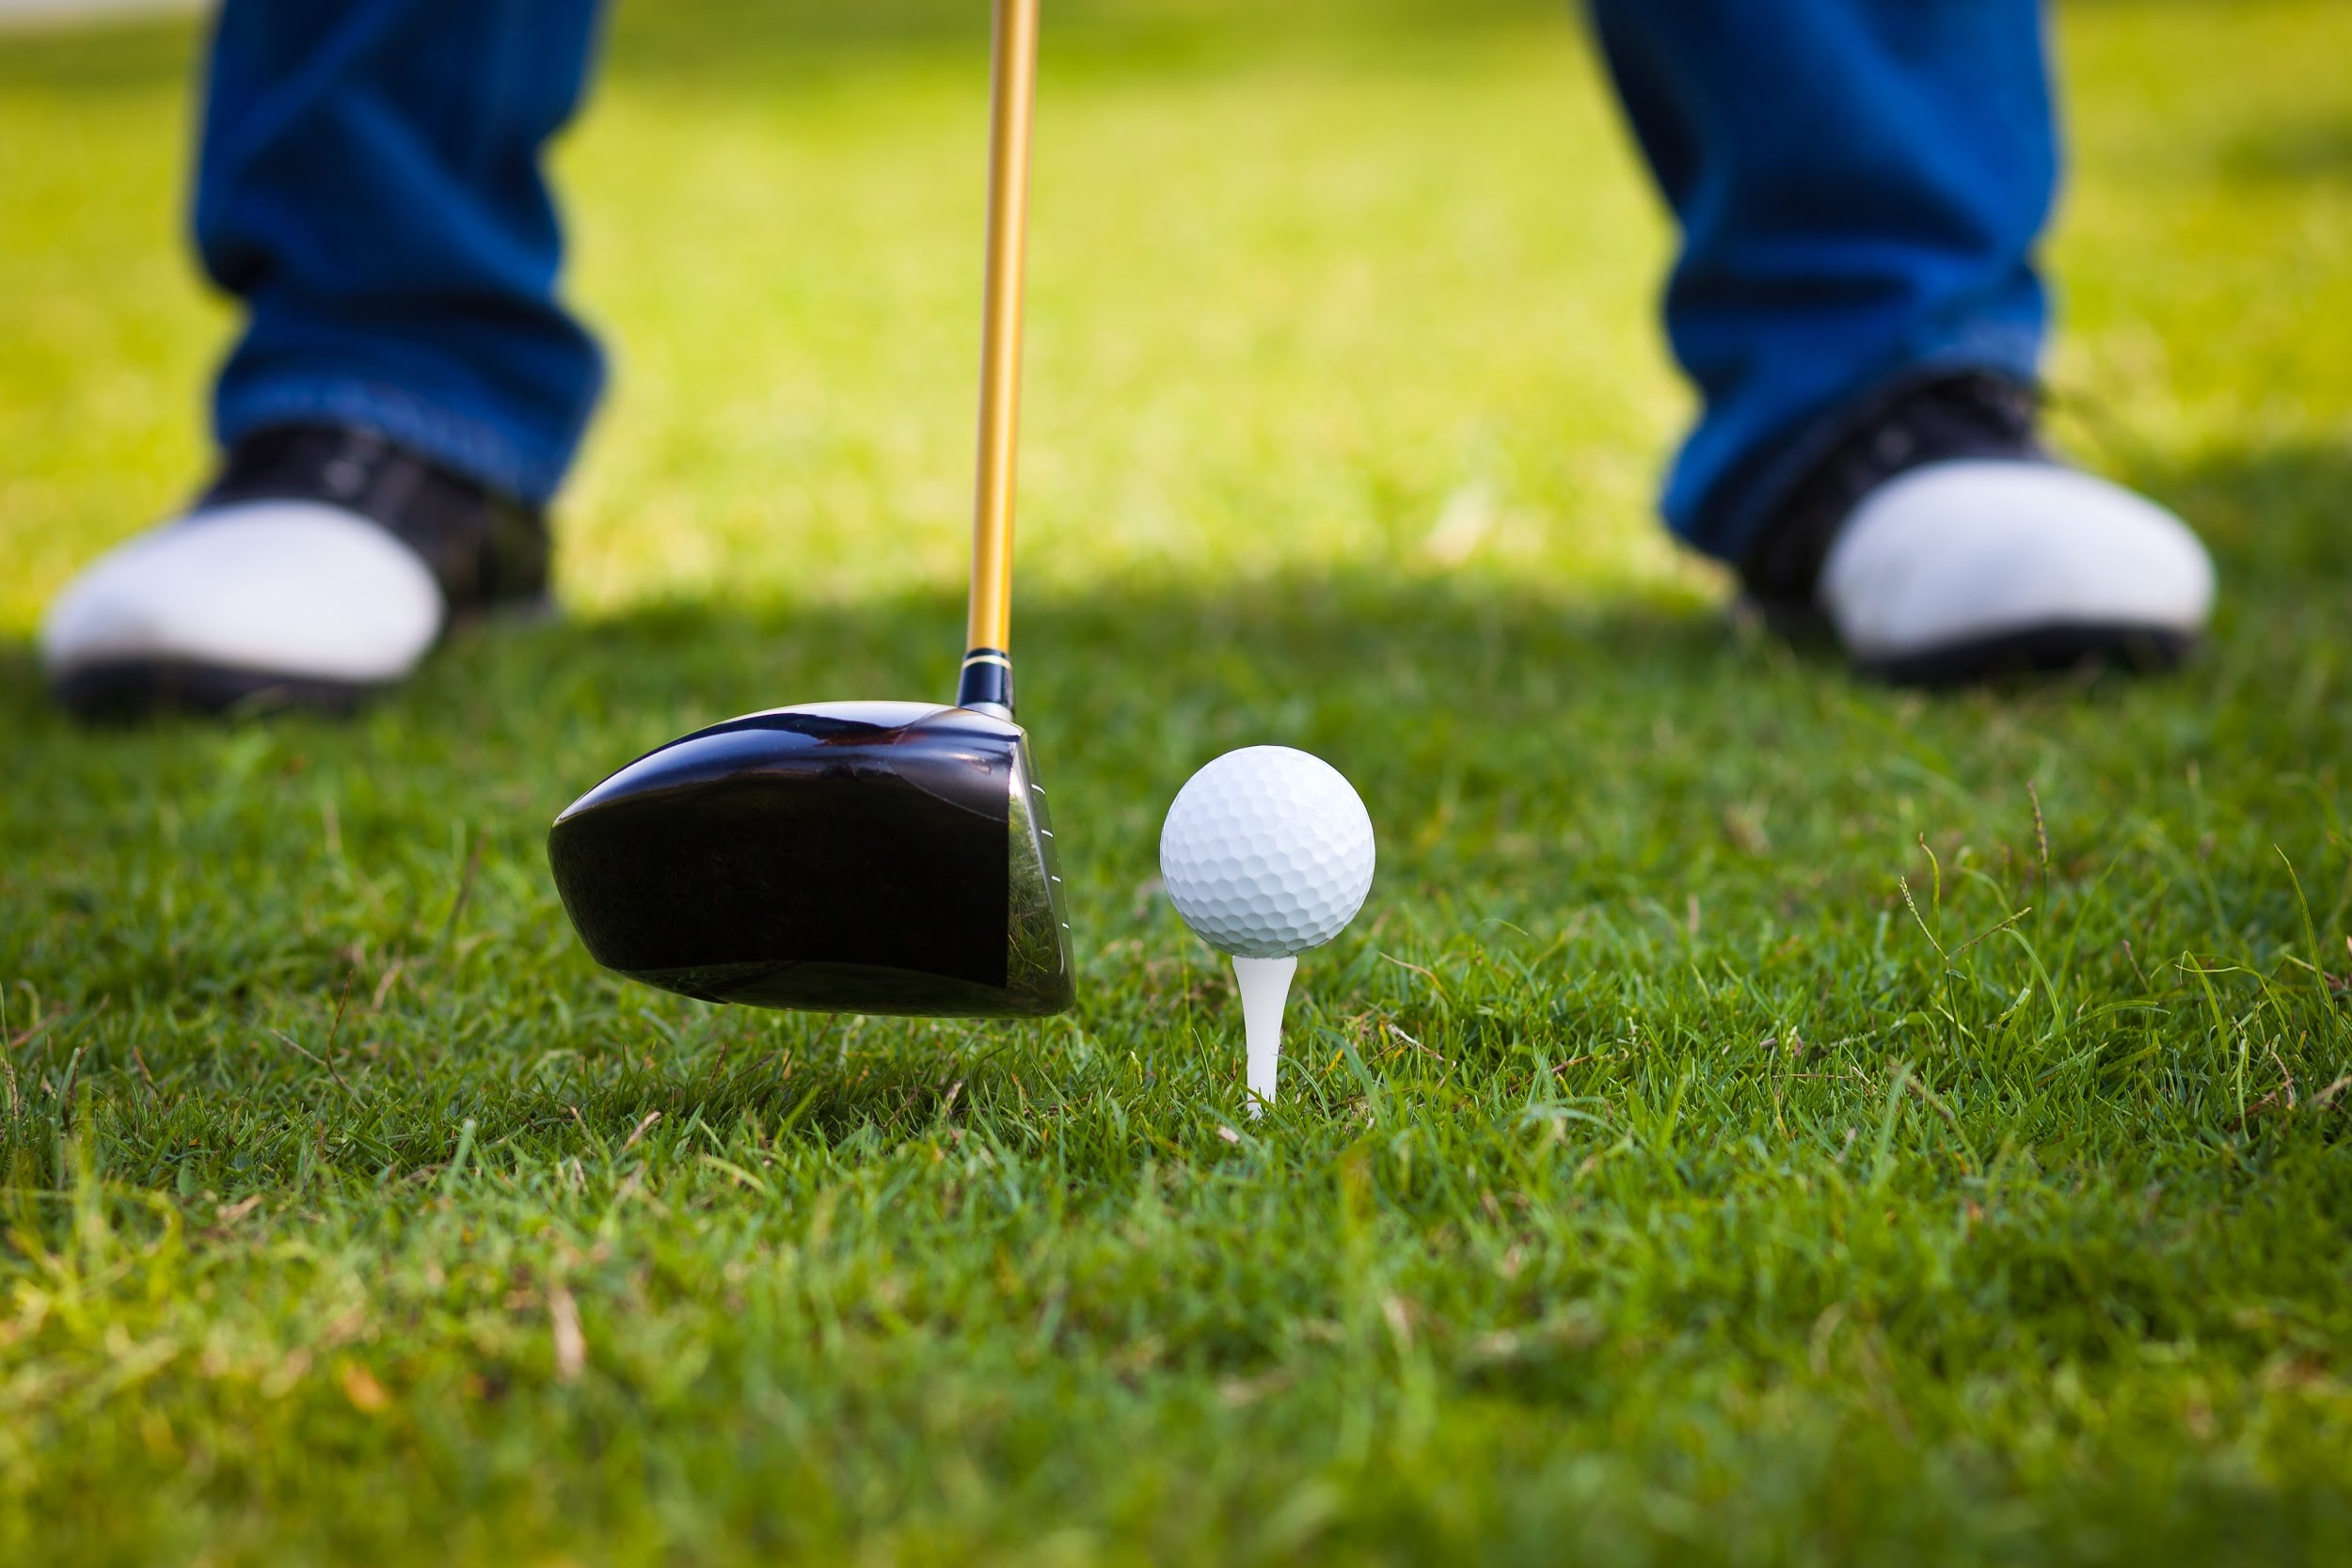 Plant your feet apart to hit the ball far